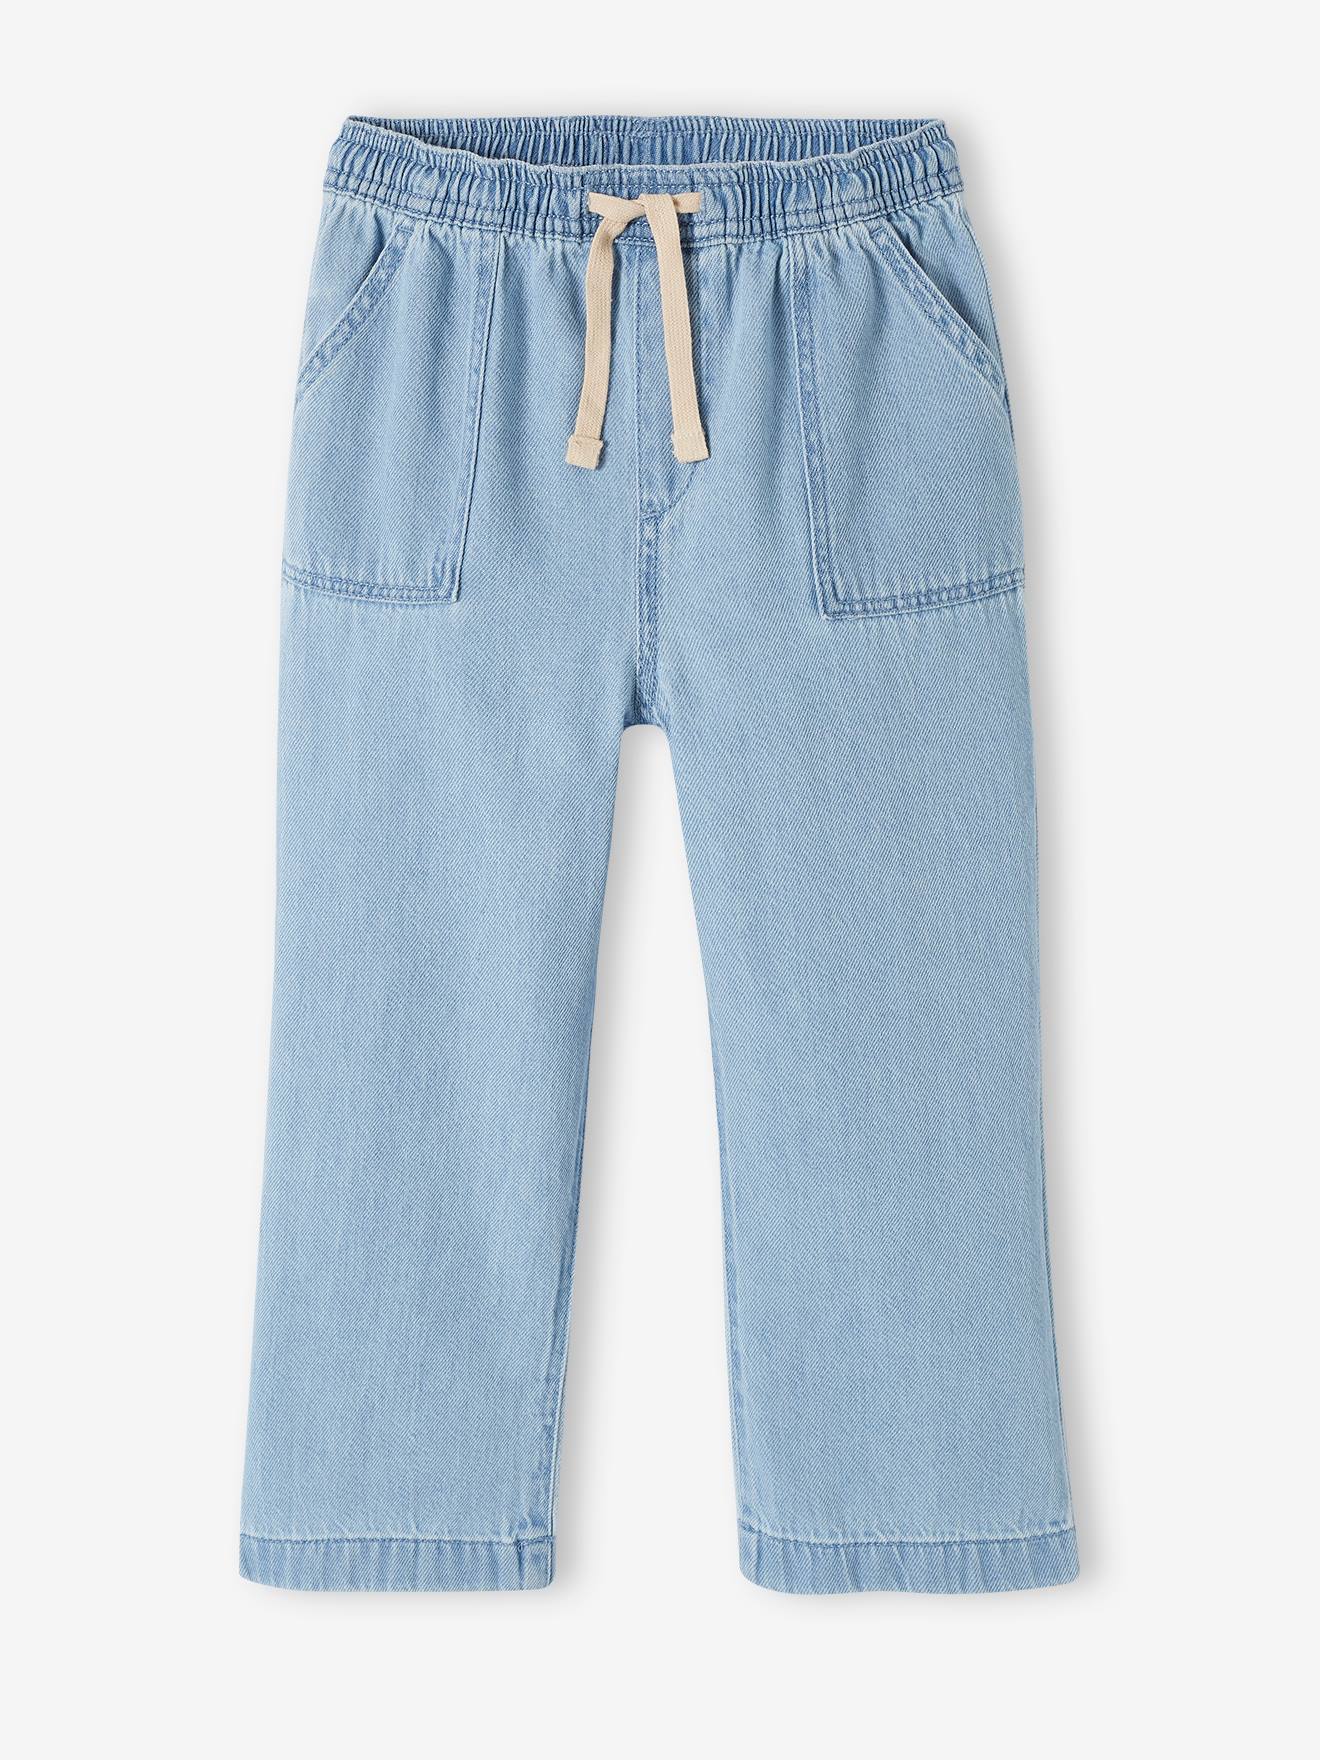 Loose-Fitting Straight Leg Jeans for Girls, Easy to Put On double stone